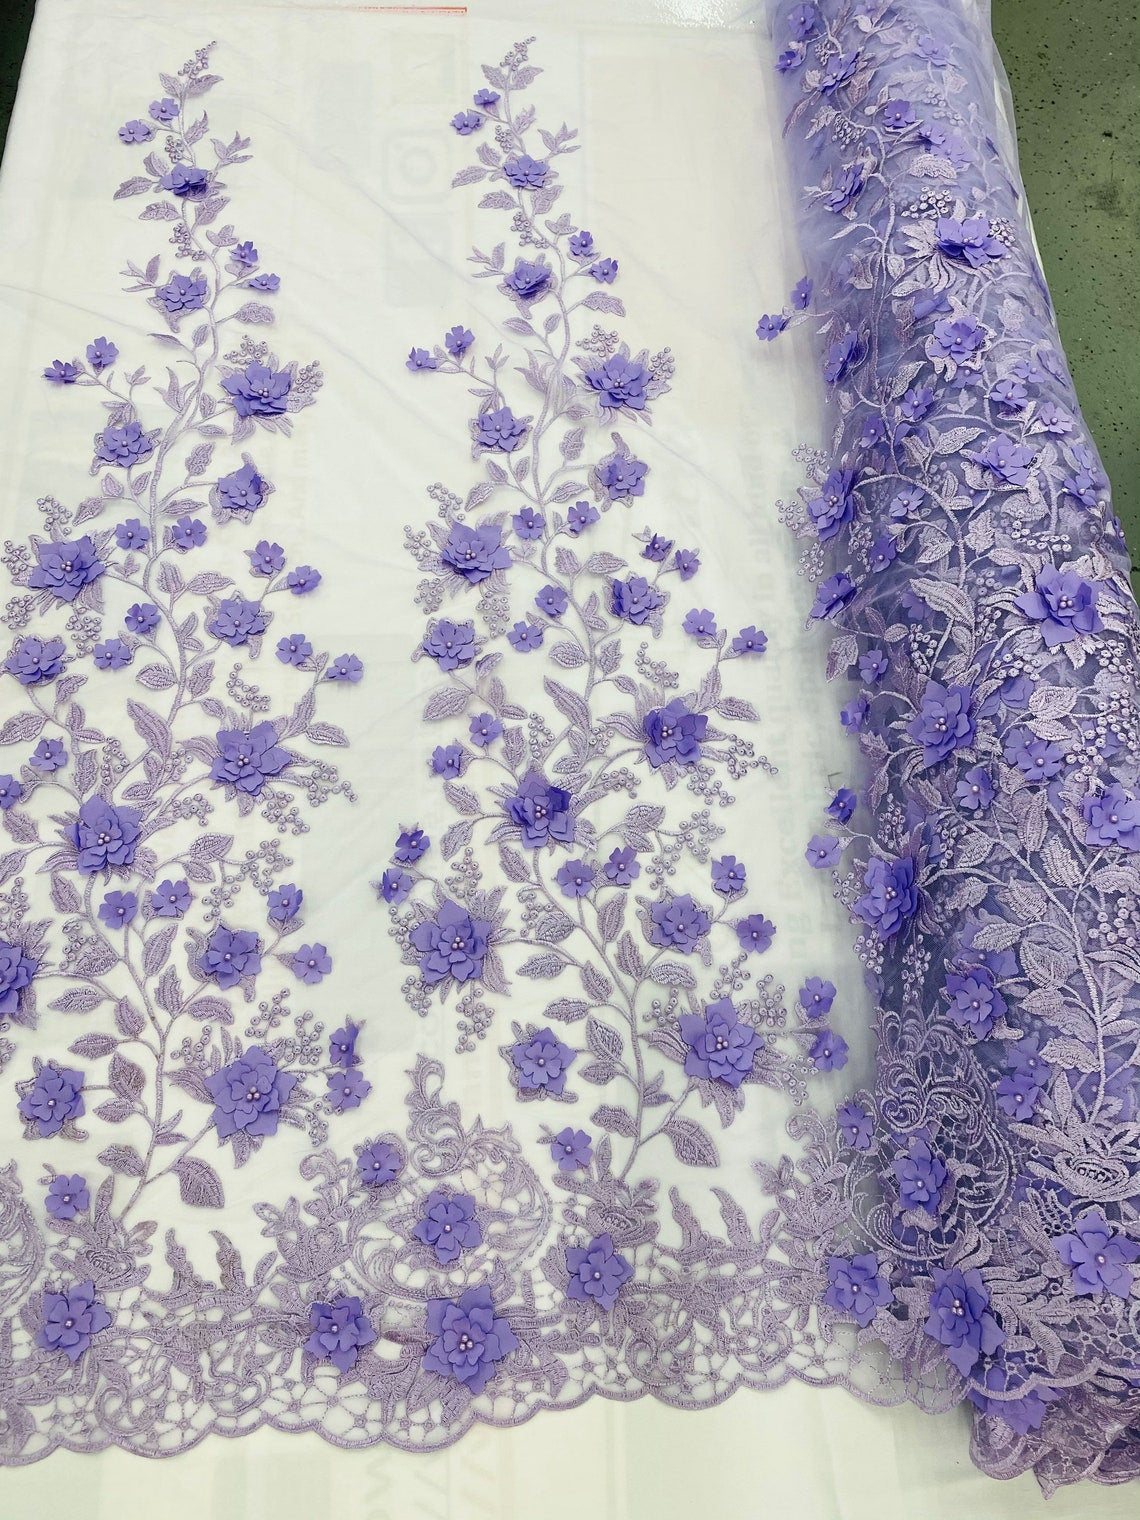 3D Floral Princess Fabric - Lilac - Embroidered Floral Lace Fabric with 3D Flowers By Yard